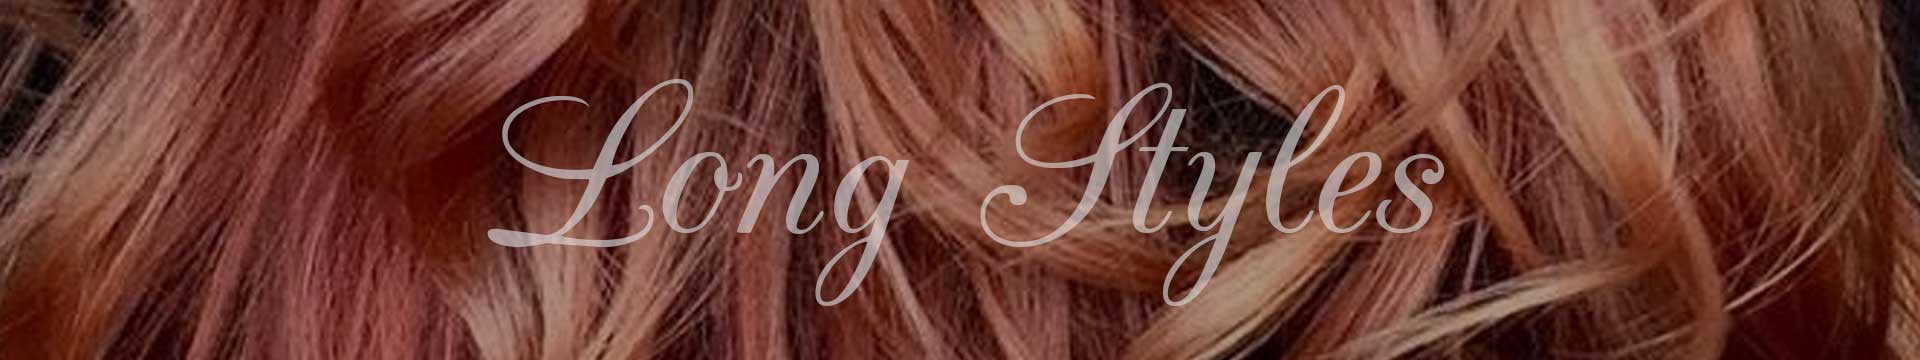 Long Hair Styles at Emily's Hairdressing